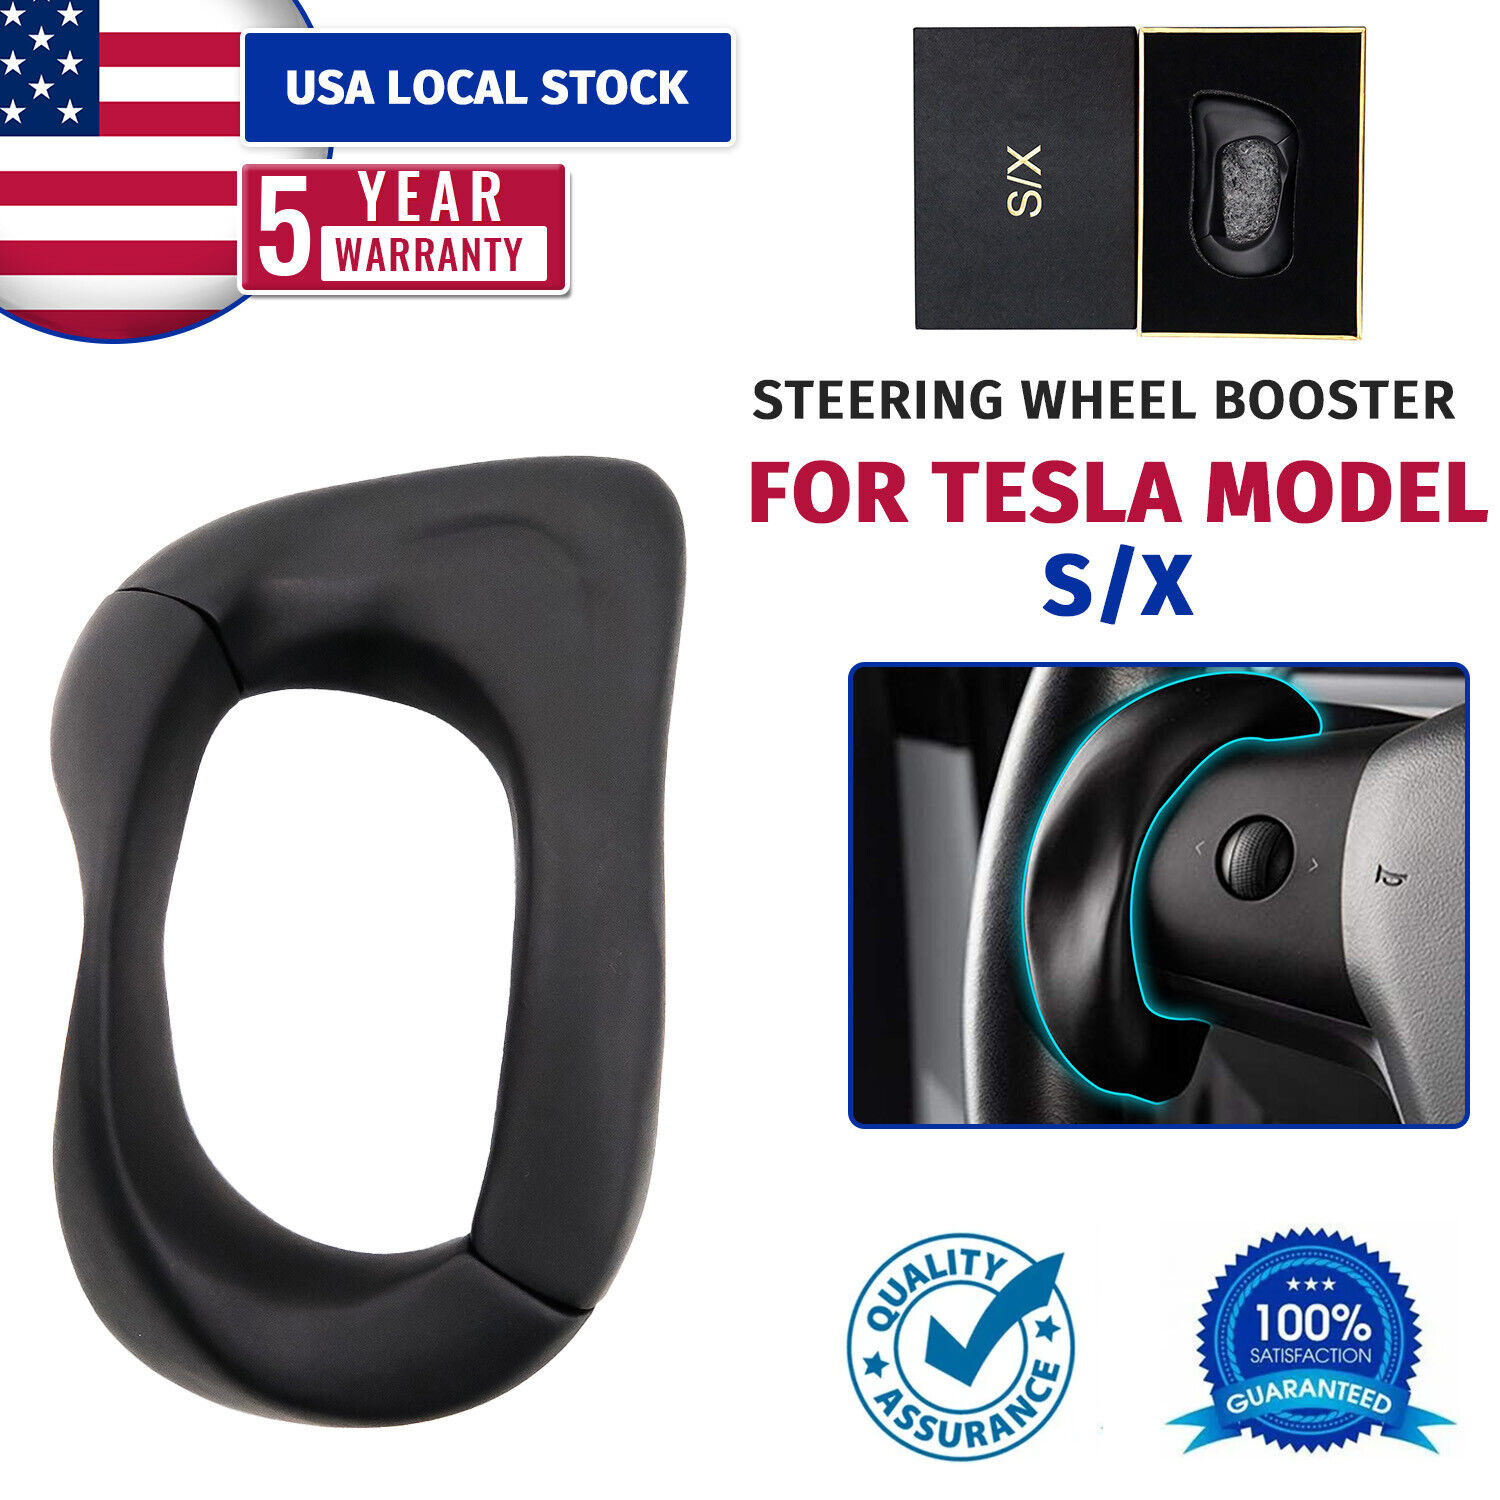 Steering Wheel Booster Assisted Counterweight Ring For Tesla Model S/X Autopilot